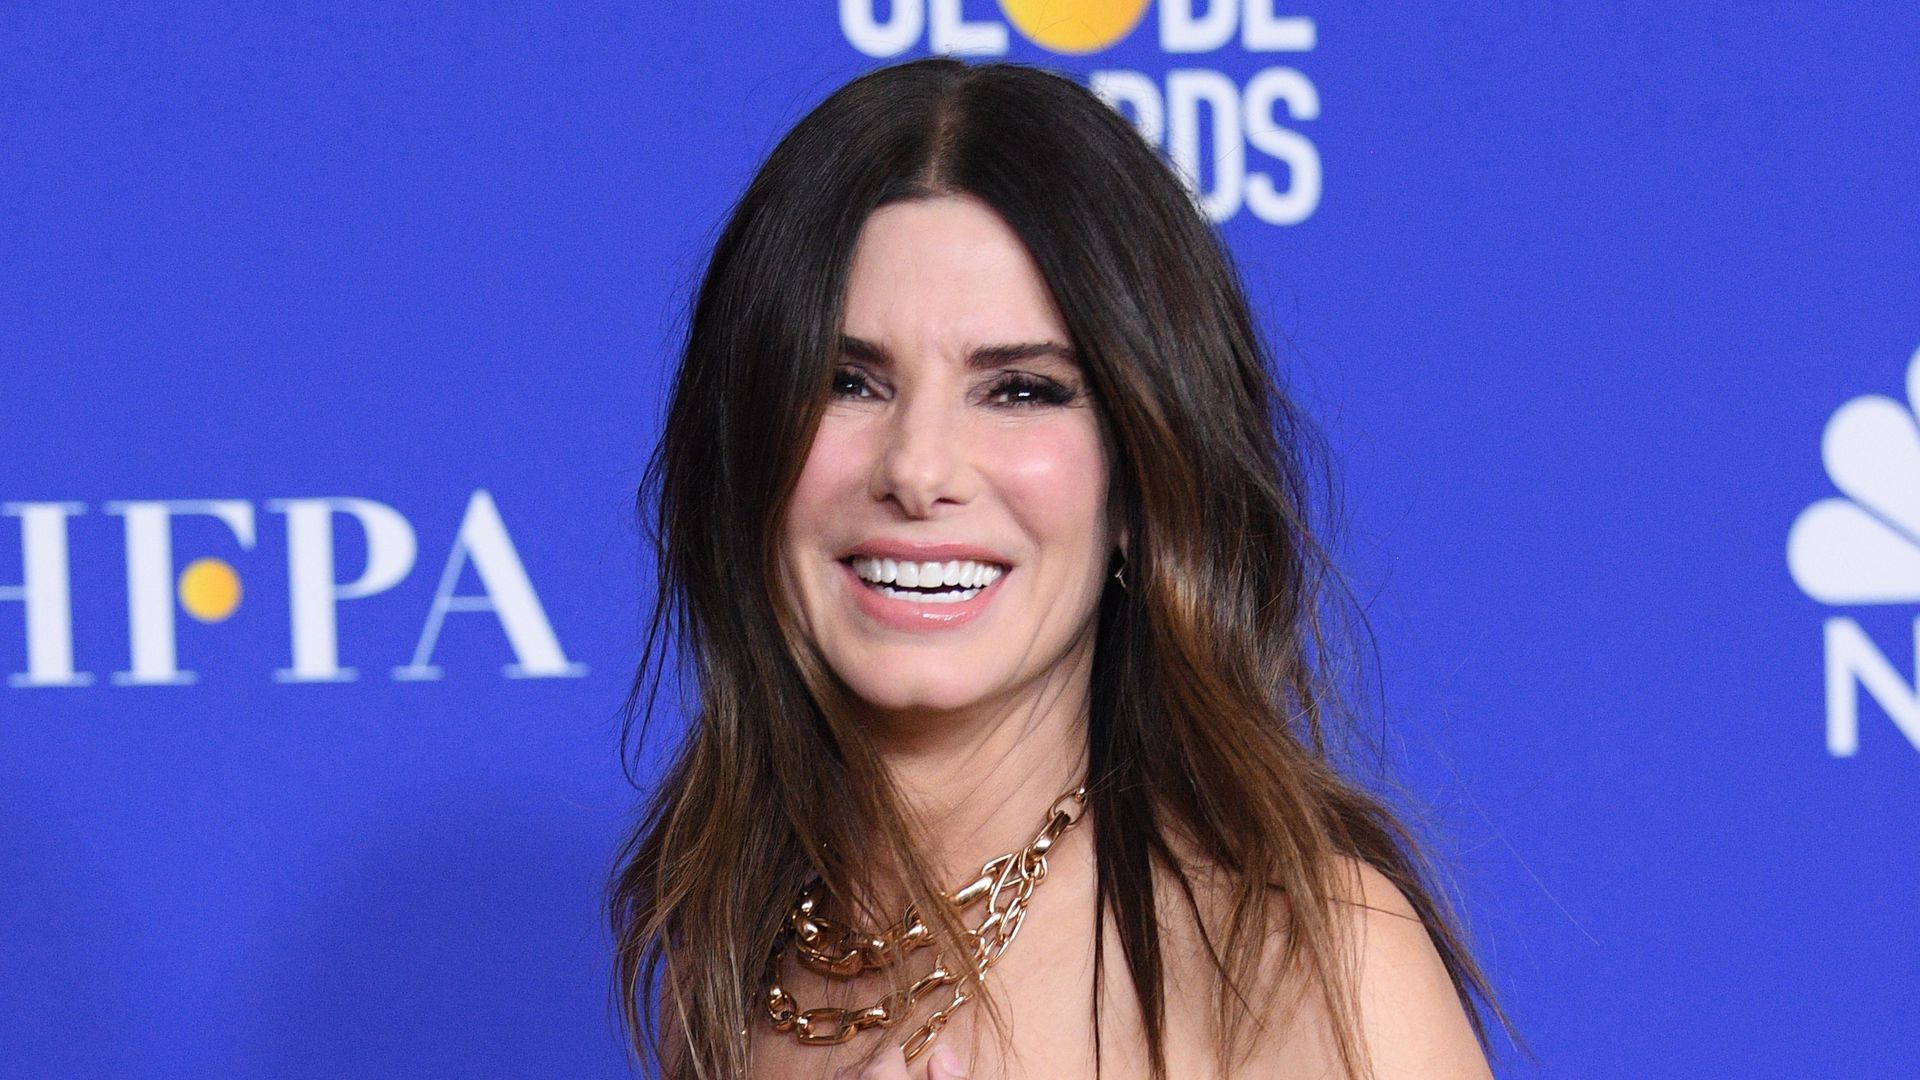 Sandra Bullock teases return to the movies amid decision to step away for family – and you won't believe who with